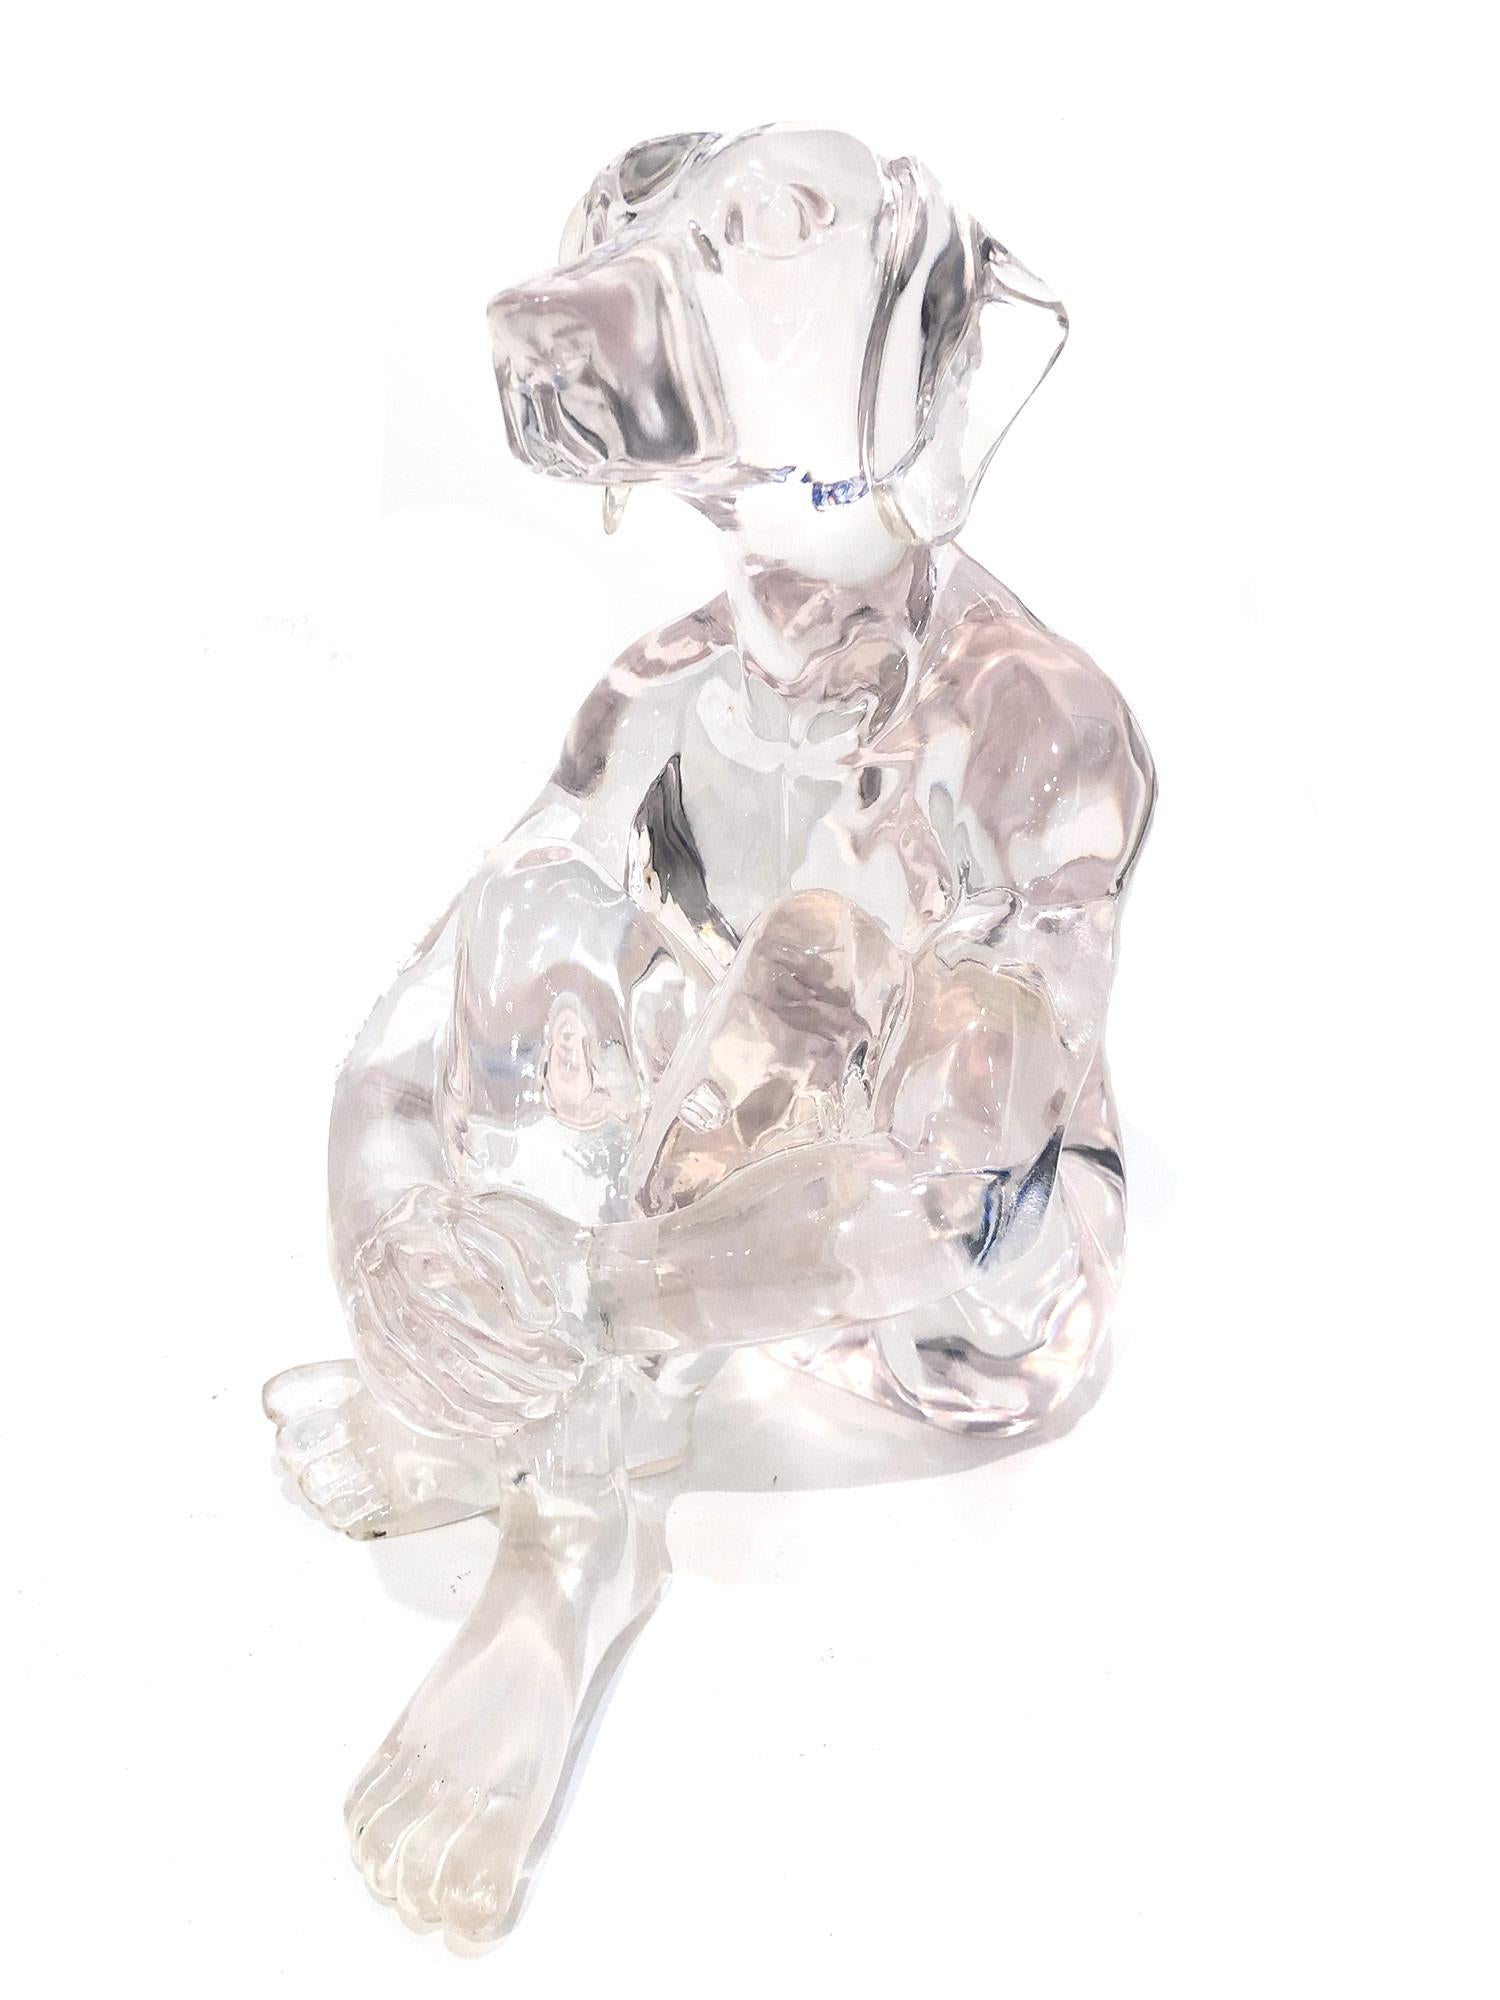 Gillie and Marc Schattner Figurative Sculpture - "Lolly Dogman (Clear)" Pop Art Clear Polyresin Sculpture of Dogman Sitting Down